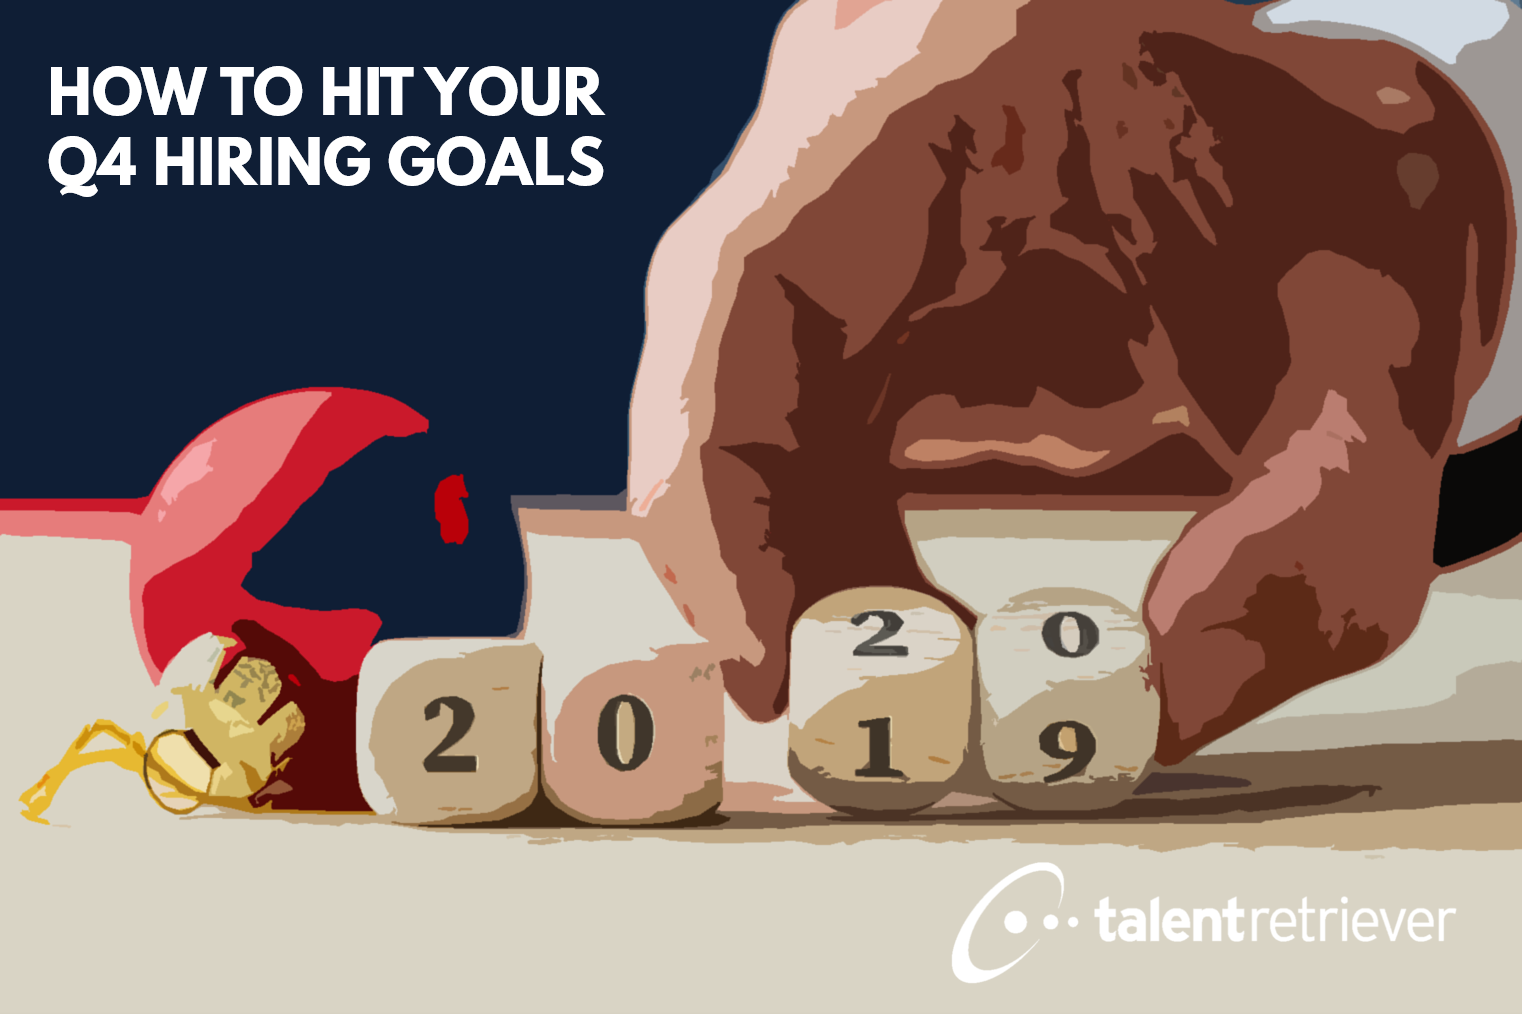 How to Hit Your Q4 Hiring Goals